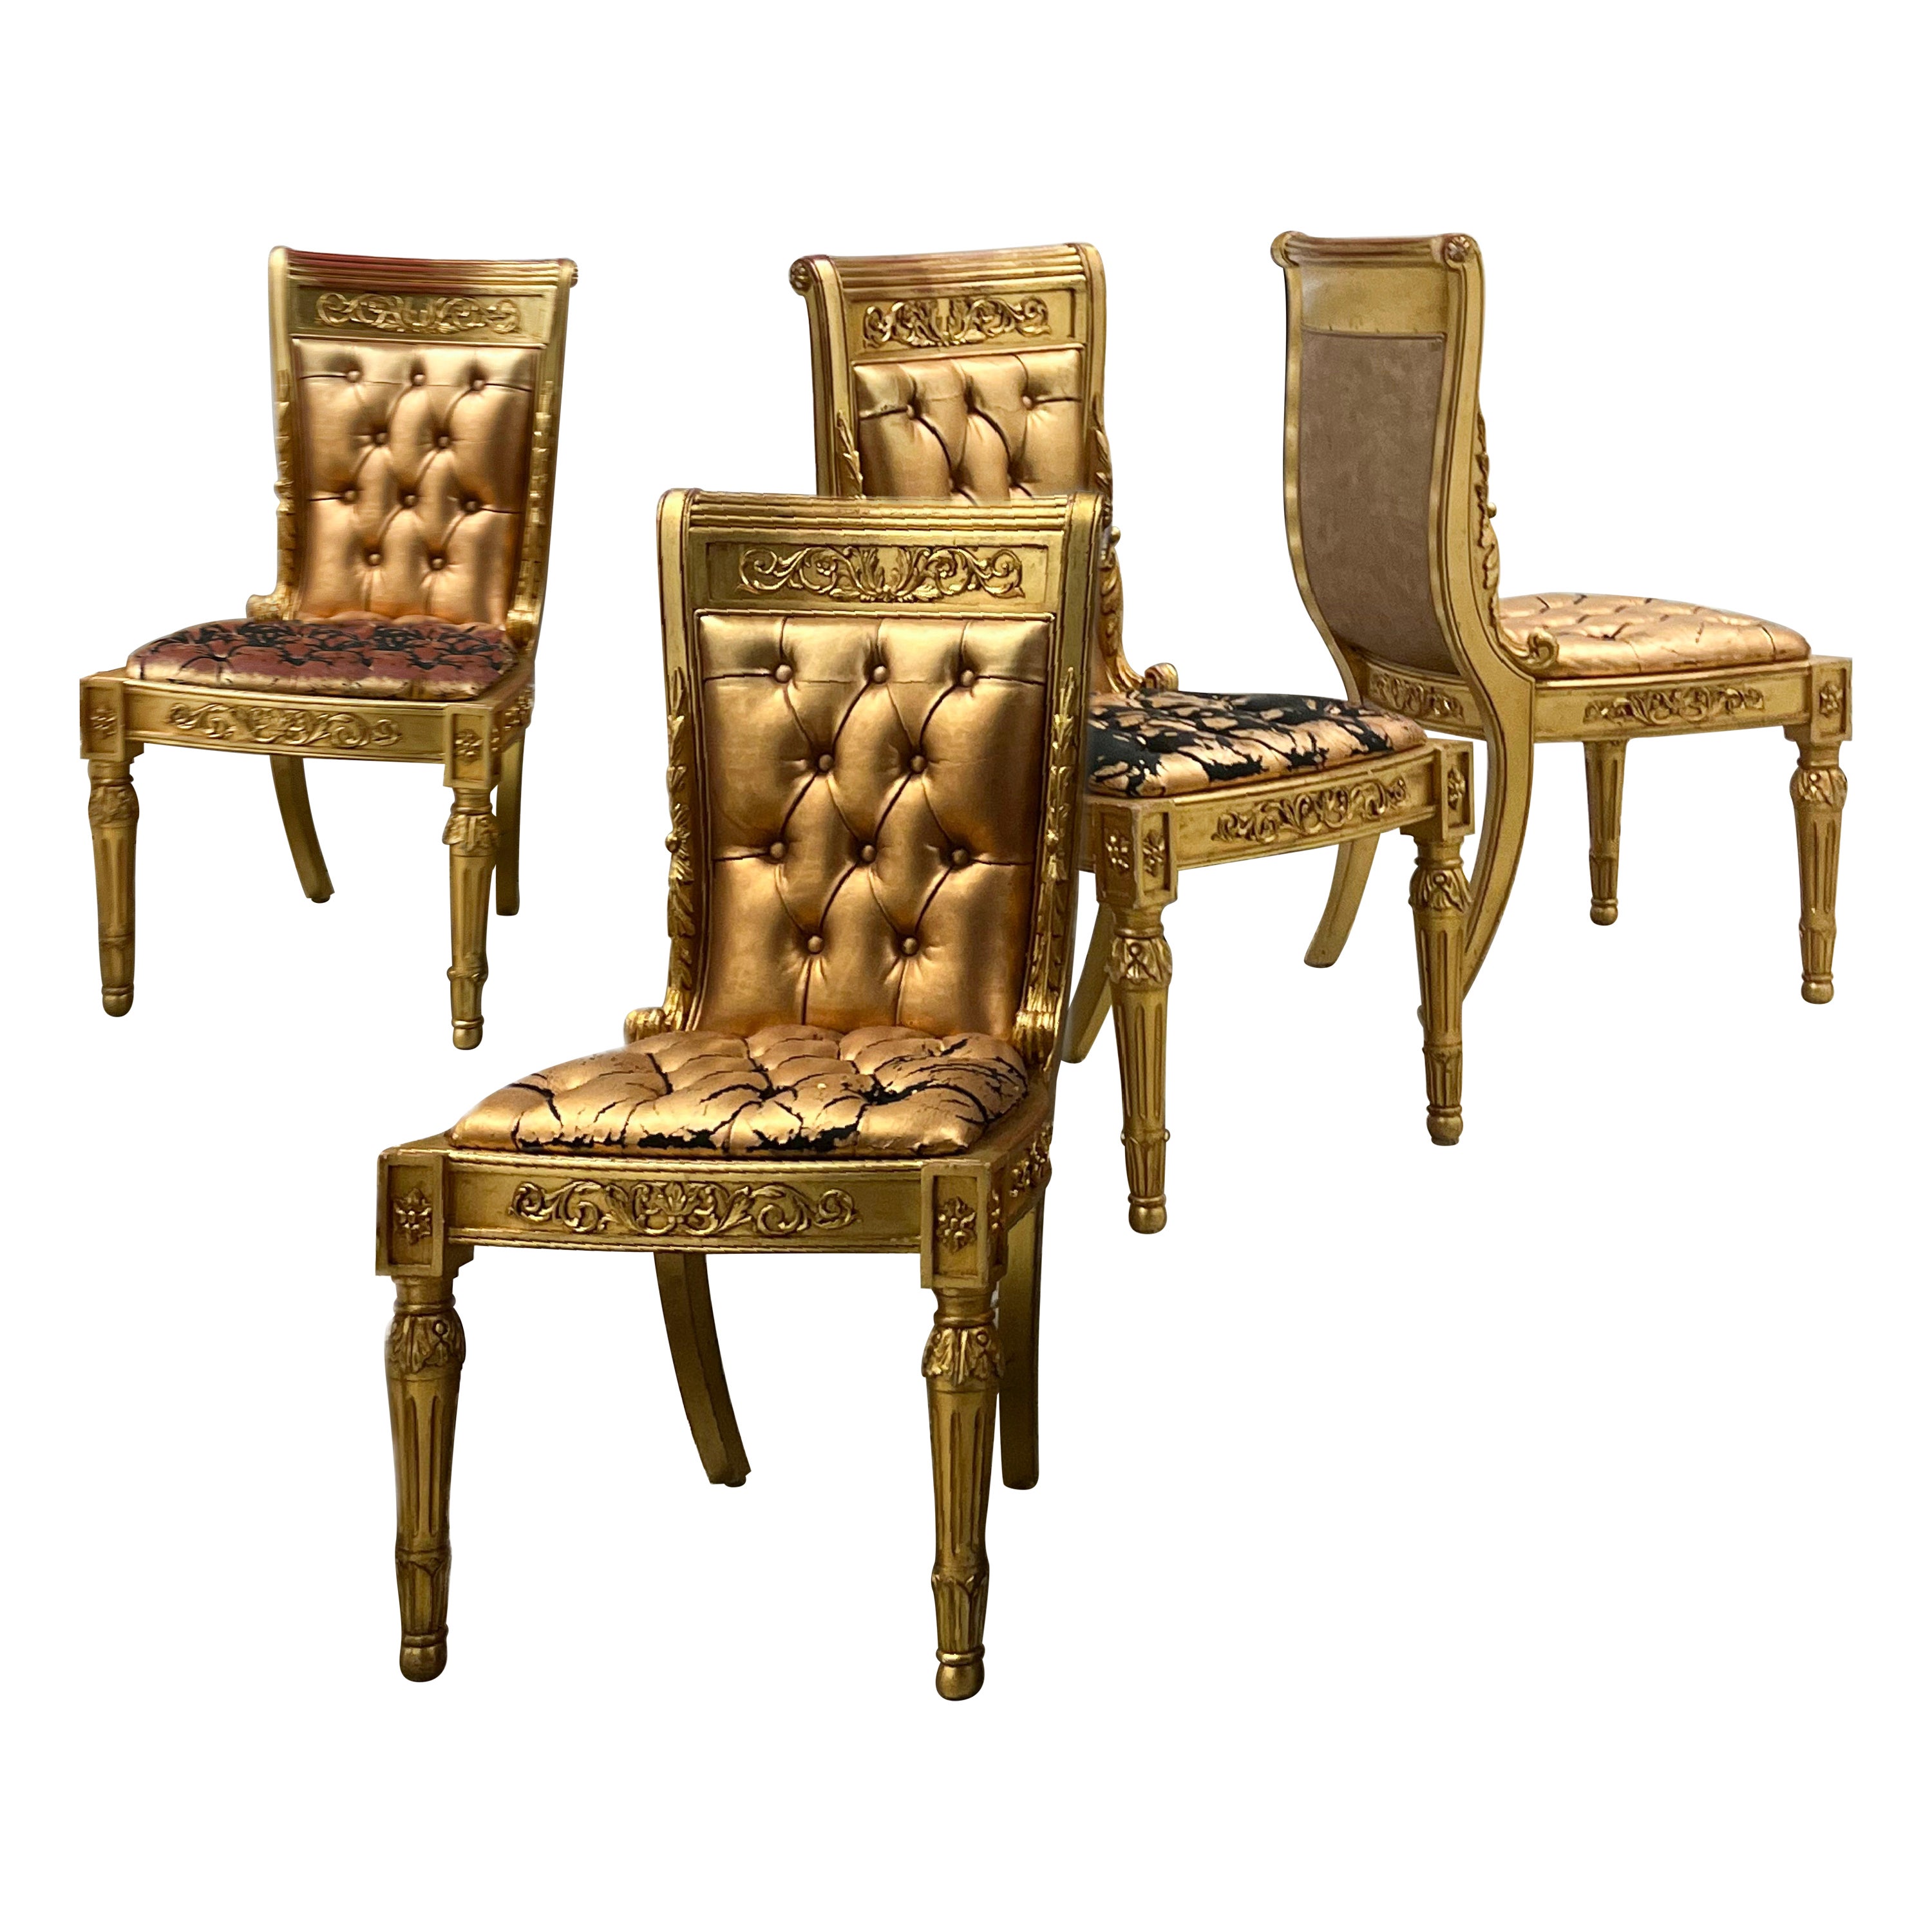 Pair Of Antique Louis Xvi Gilded Gold Chairs With Atelier Versace